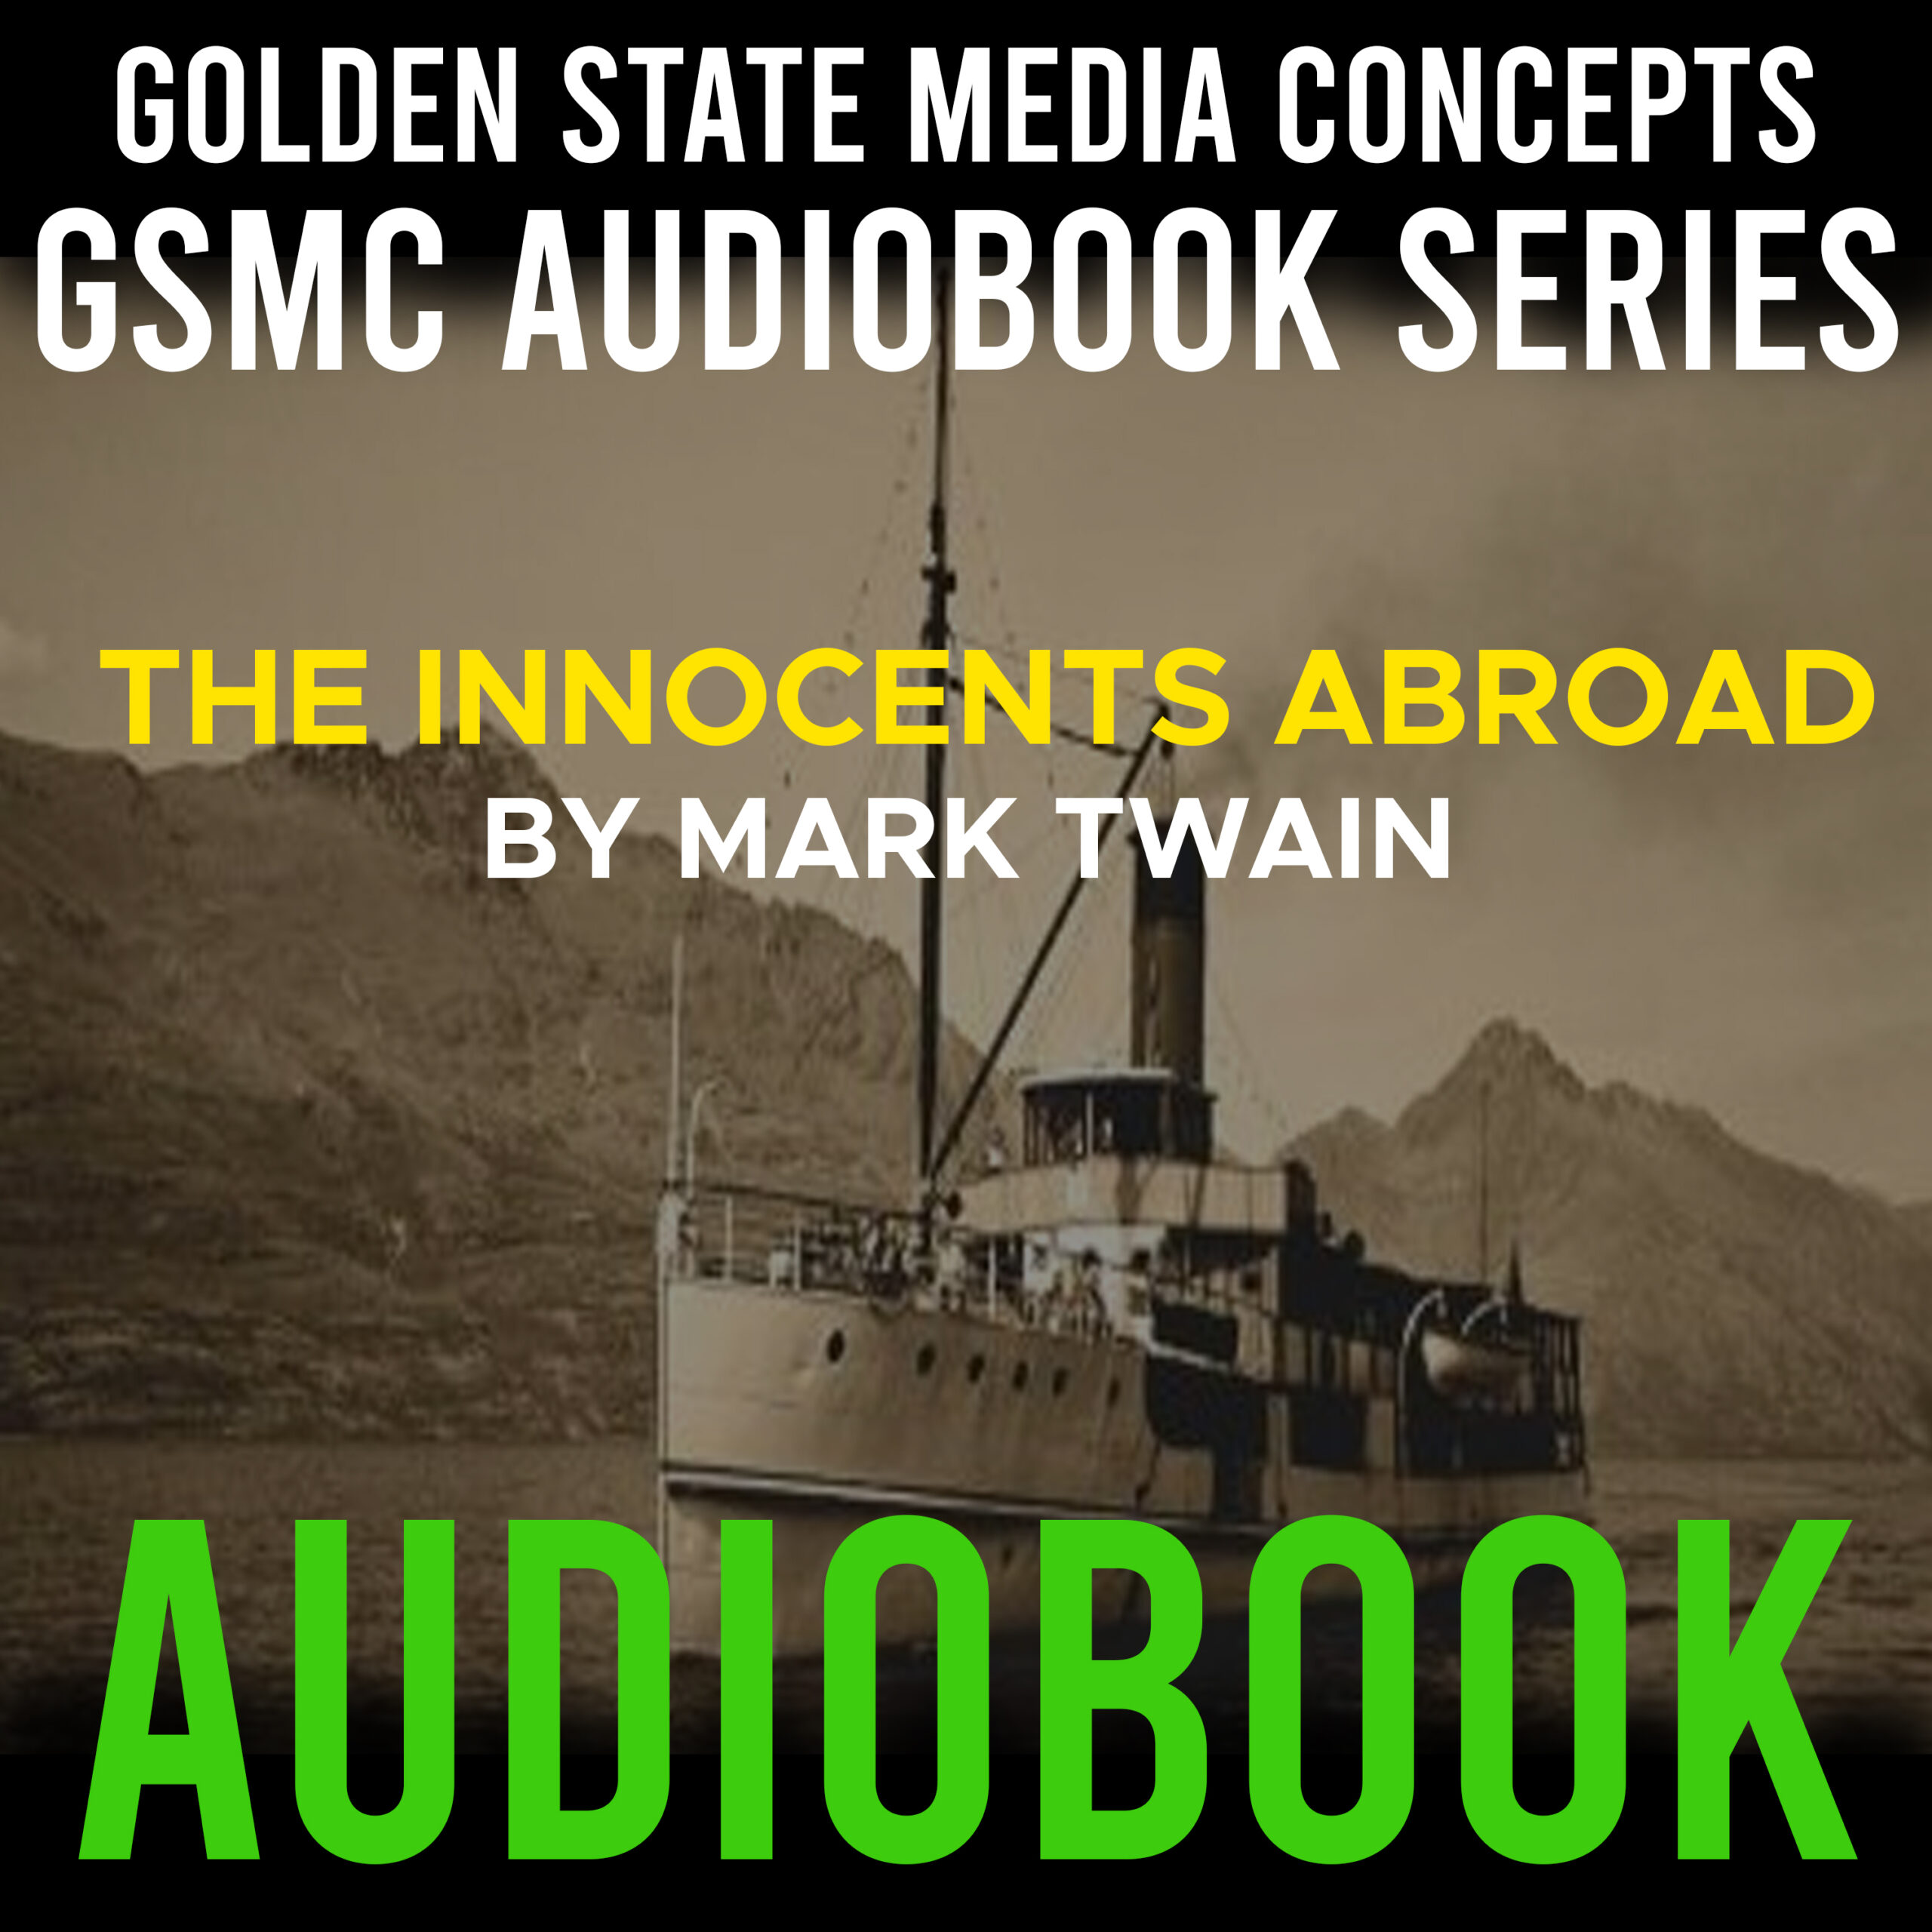 GSMC Audiobook Series: The Innocents Abroad